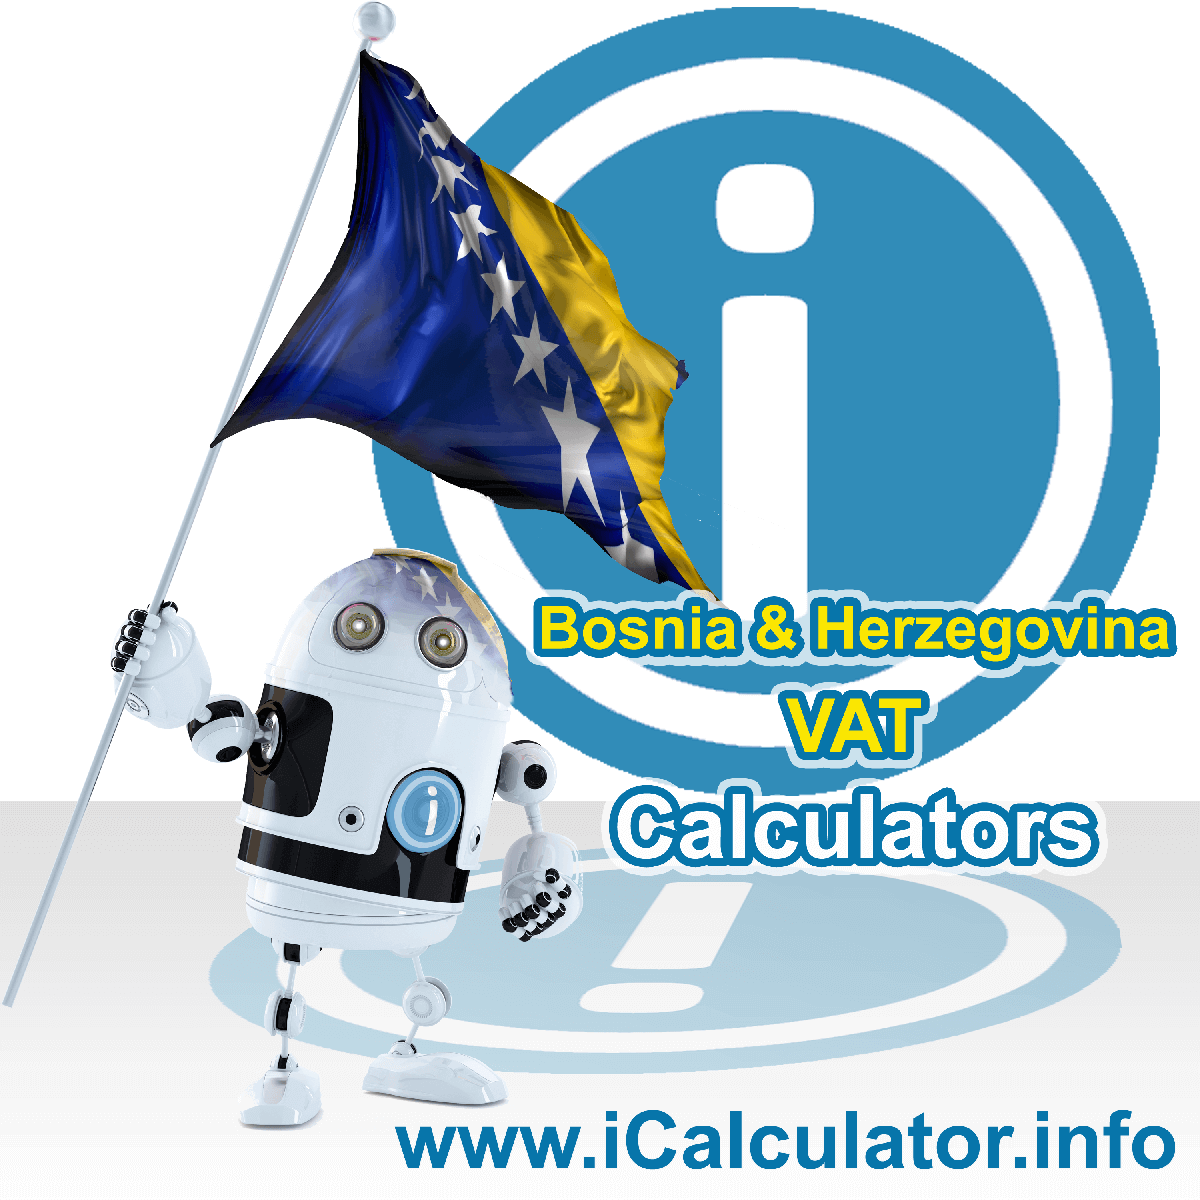 Bosnia And Herzegovina VAT Calculator. This image shows the Bosnia And Herzegovina flag and information relating to the VAT formula used for calculating Value Added Tax in Bosnia And Herzegovina using the Bosnia And Herzegovina VAT Calculator in 2023